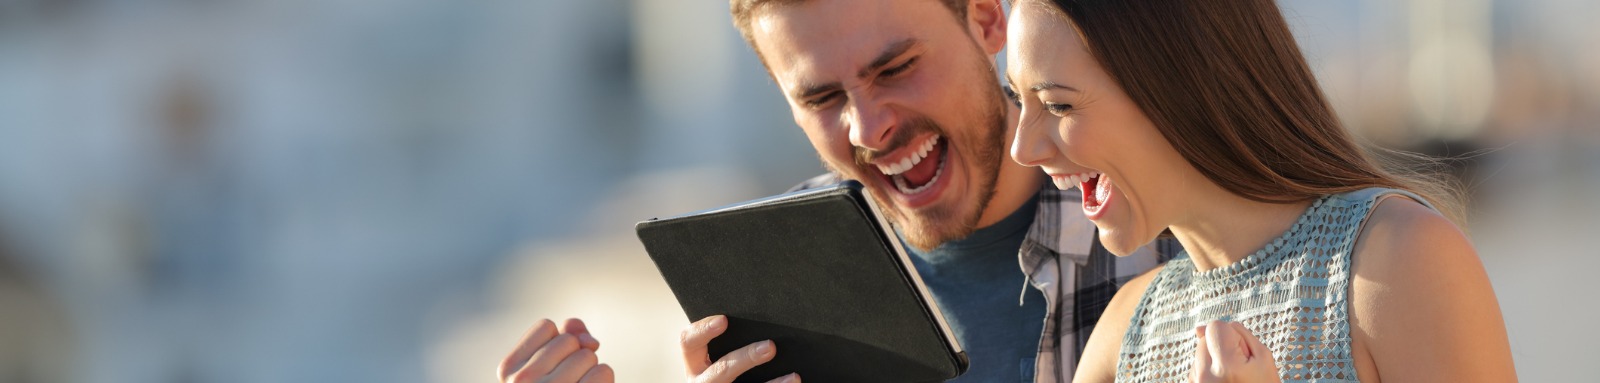 Excited woman and man grinning at ipad